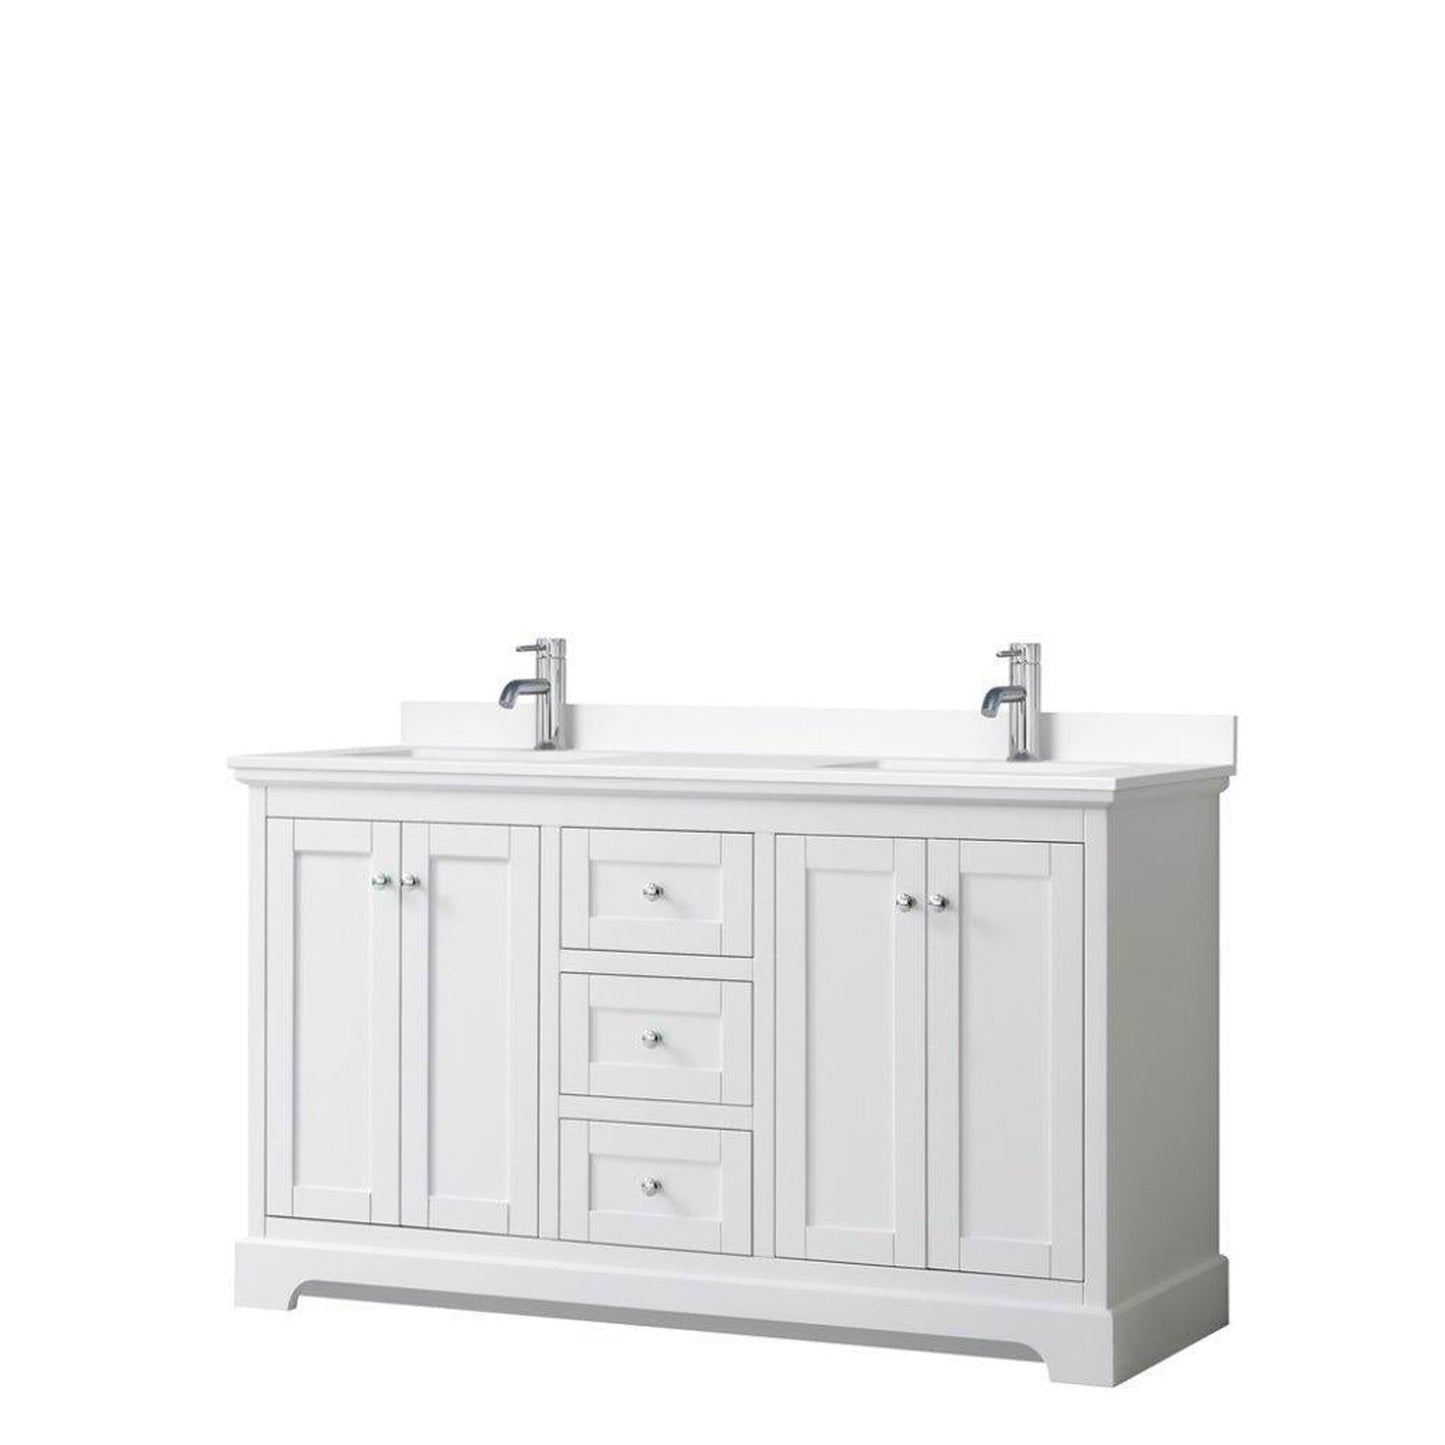 Wyndham Collection Avery 60" White Double Bathroom Vanity, White Cultured Marble Countertop With 1-Hole Faucet, Square Sink, Polished Chrome Trims